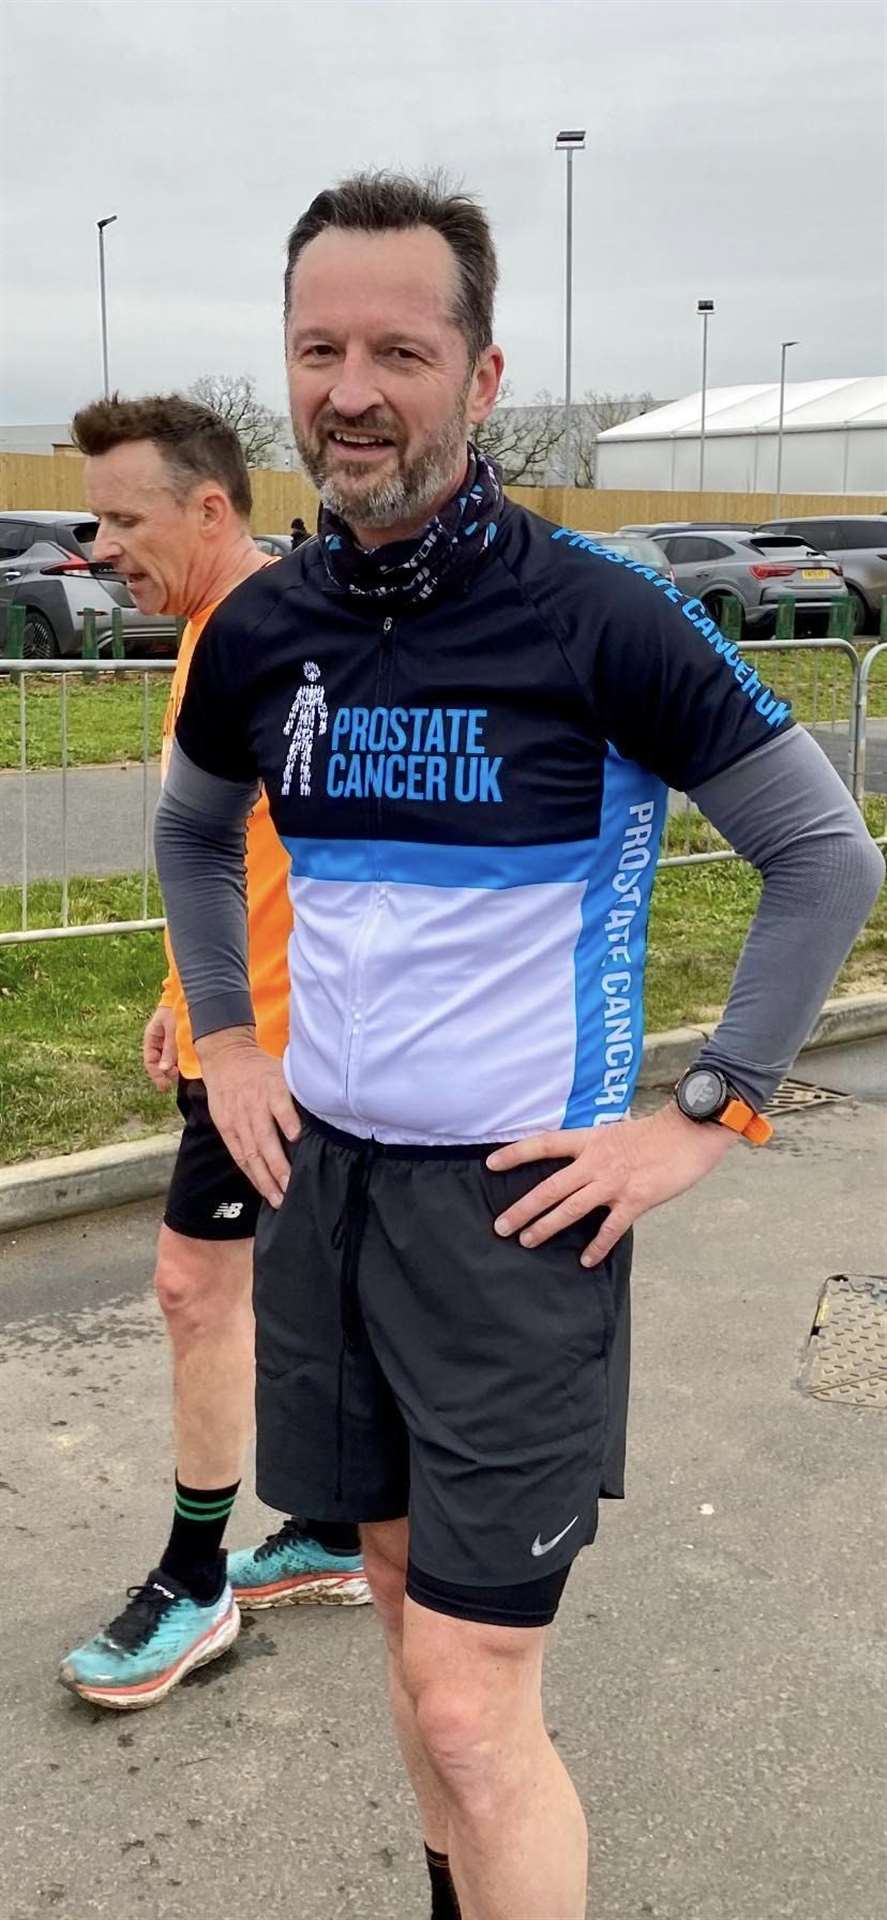 Russell Cager hopes his triathlon challenge will raise awareness of the risks of prostate cancer and encourage them to regularly check their prostate (Russell Cager)